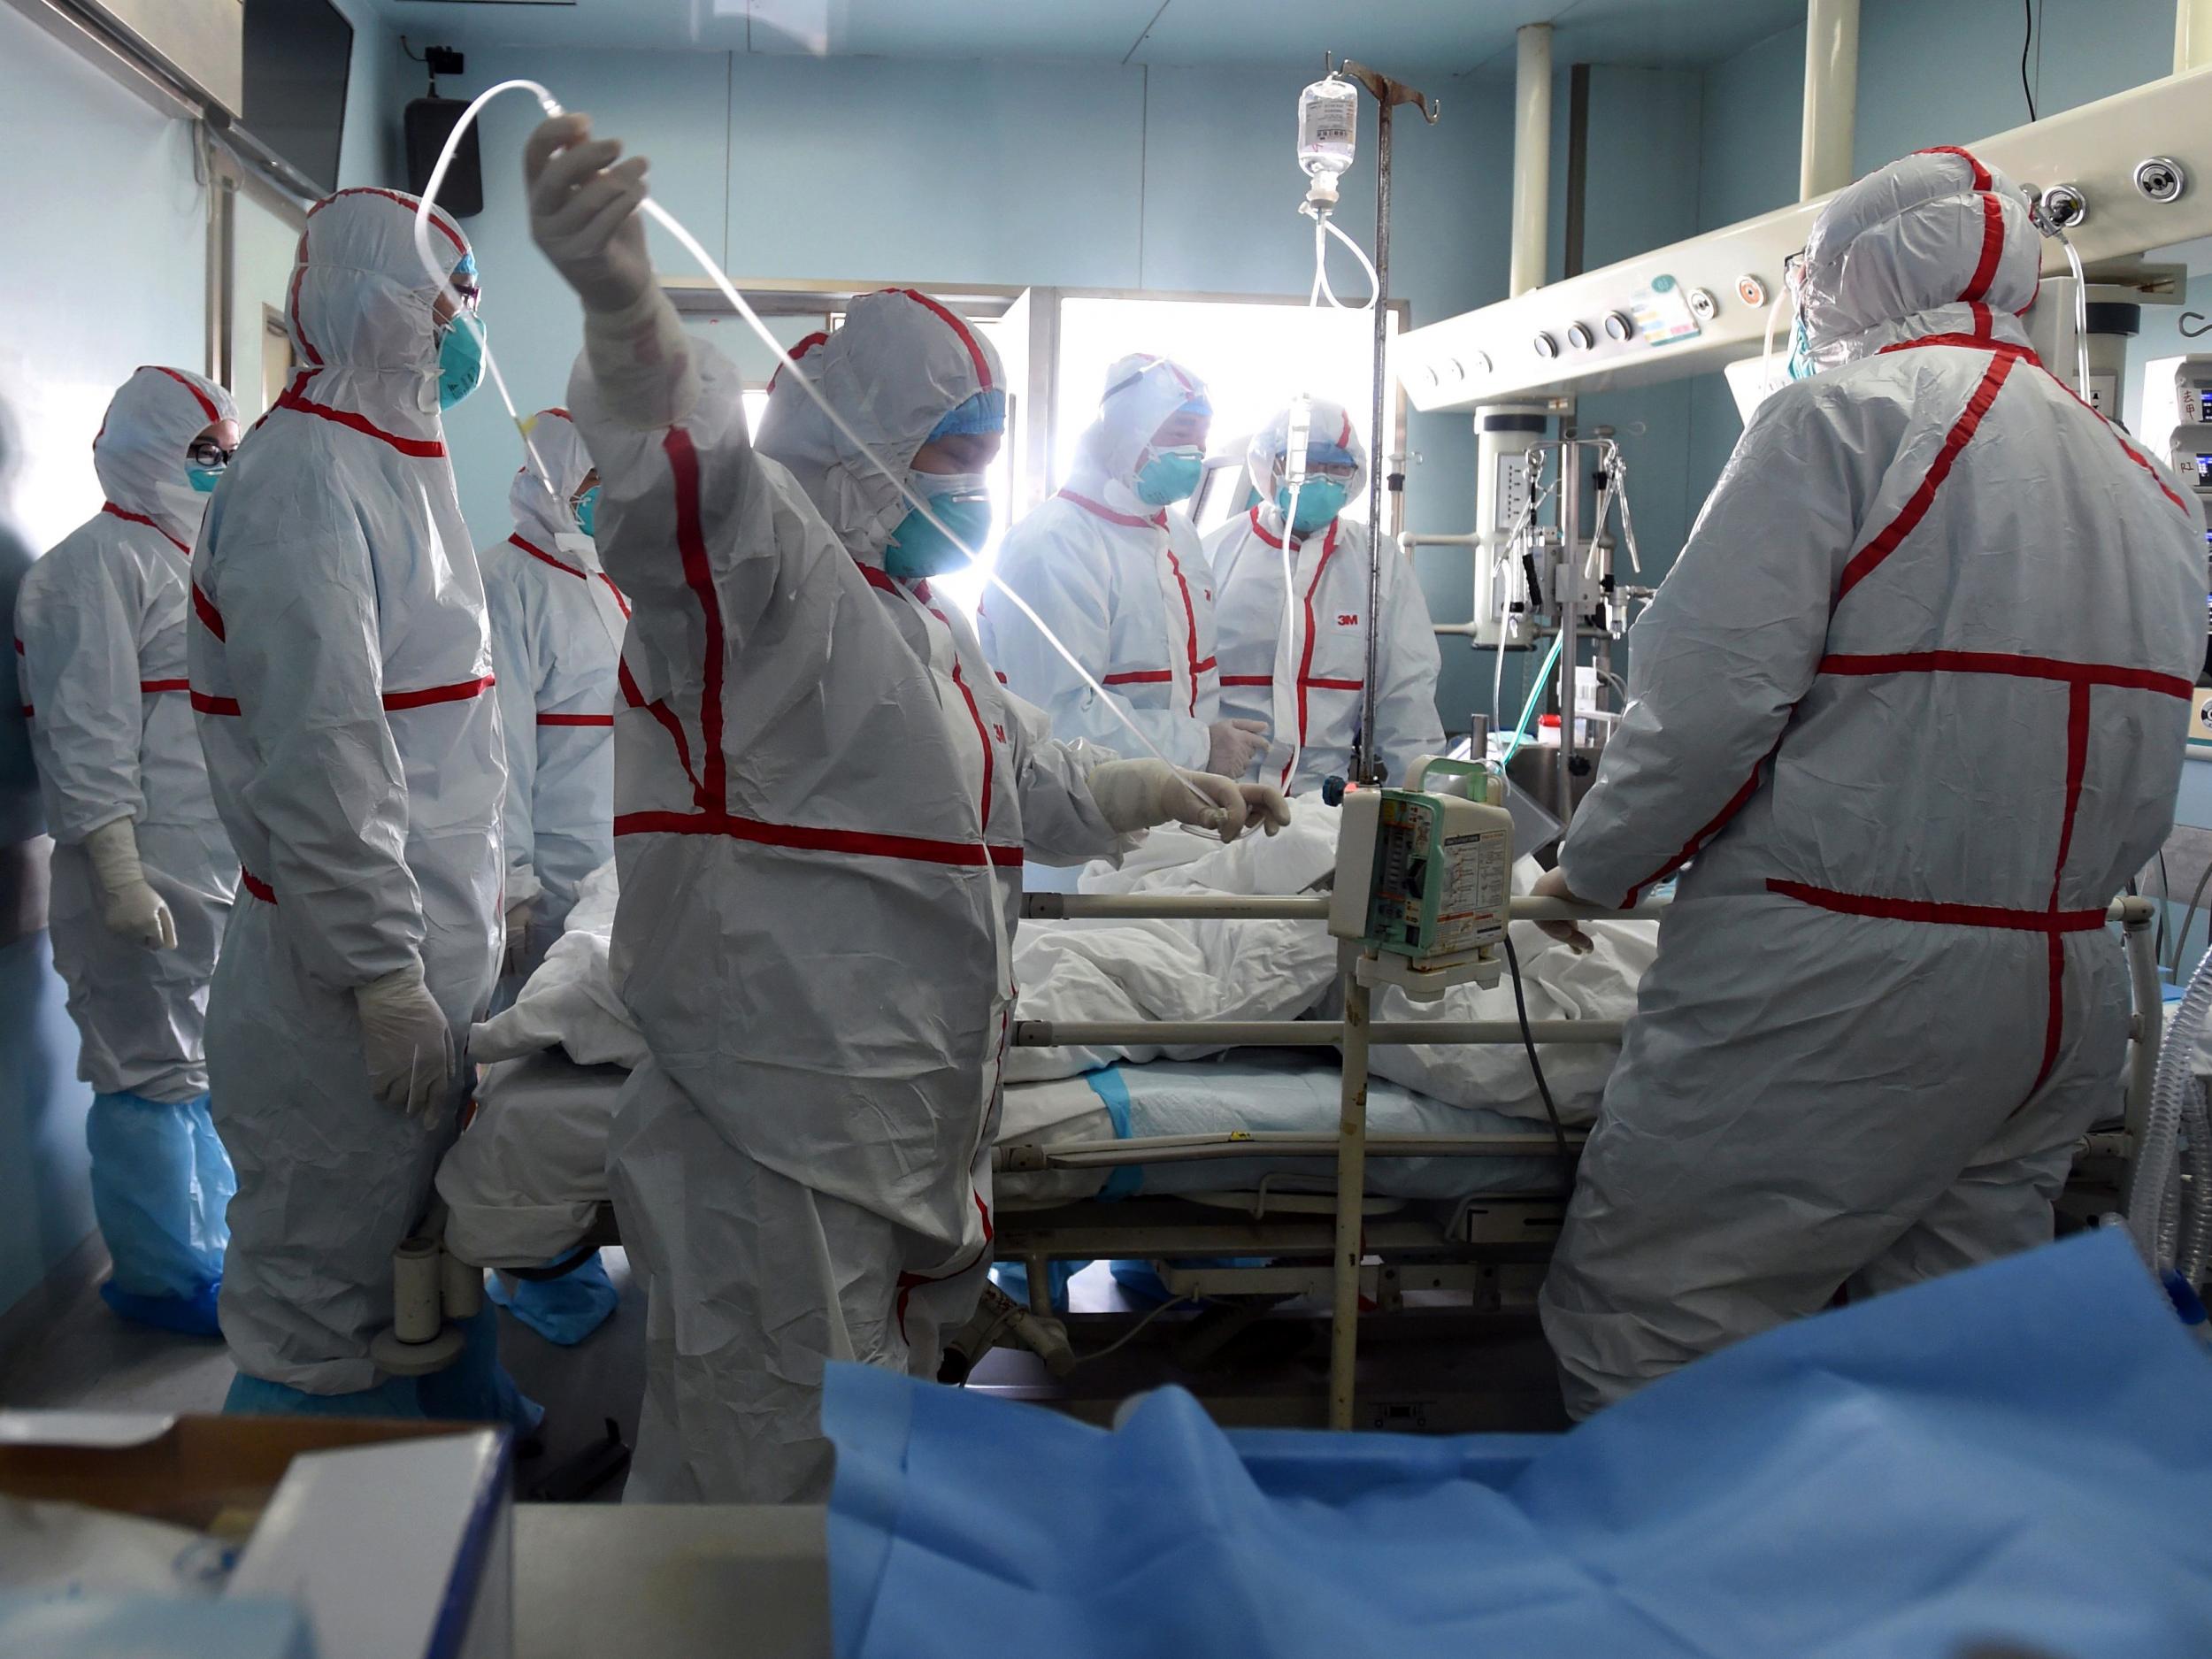 An H7N9 bird flu patient being treated in a hospital in central China's Hubei province (Getty)